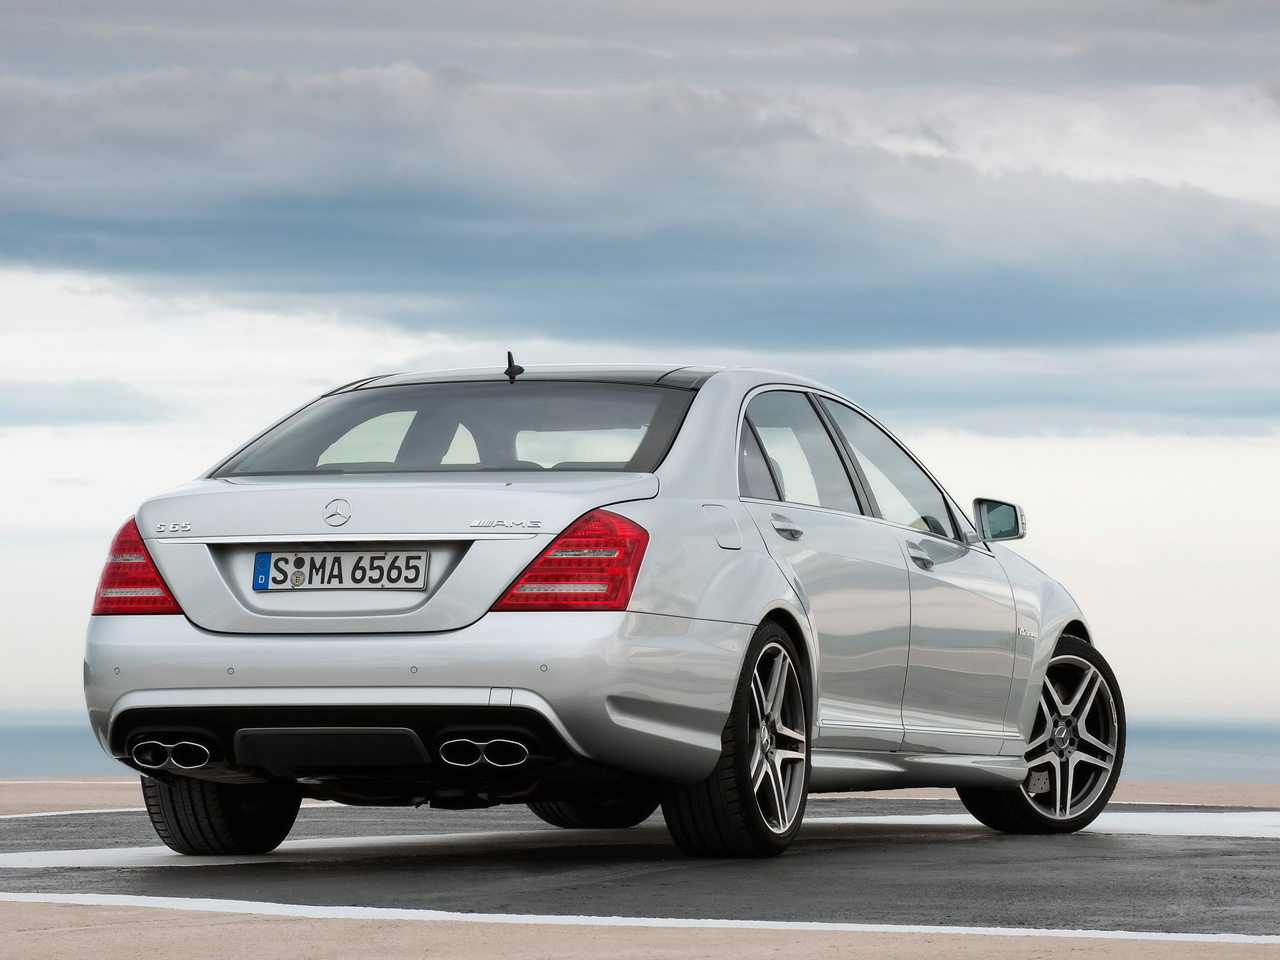 2010-Mercedes-Benz-S63-and-S65-AMG-65-AMG-Rear-Angle-1280x960.jpg